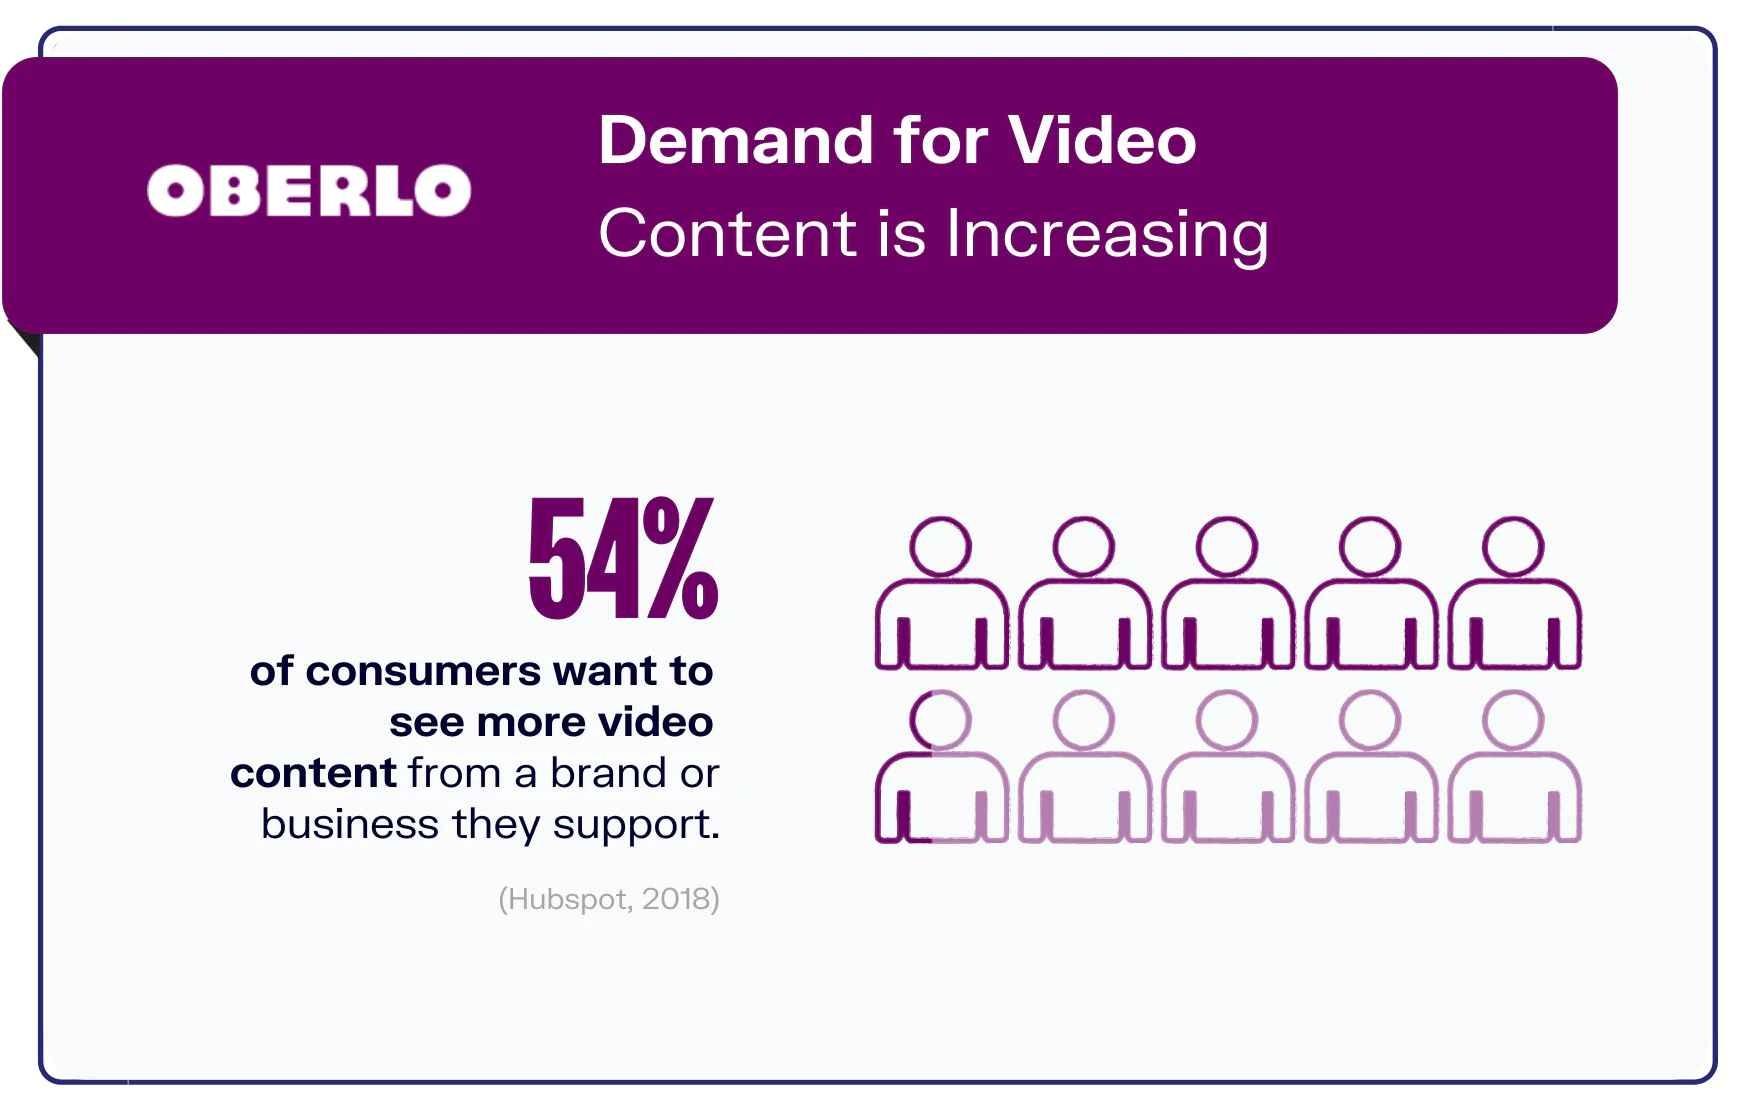 Scope of Digital Marketing in Malaysia - Increased Demand for Video Content